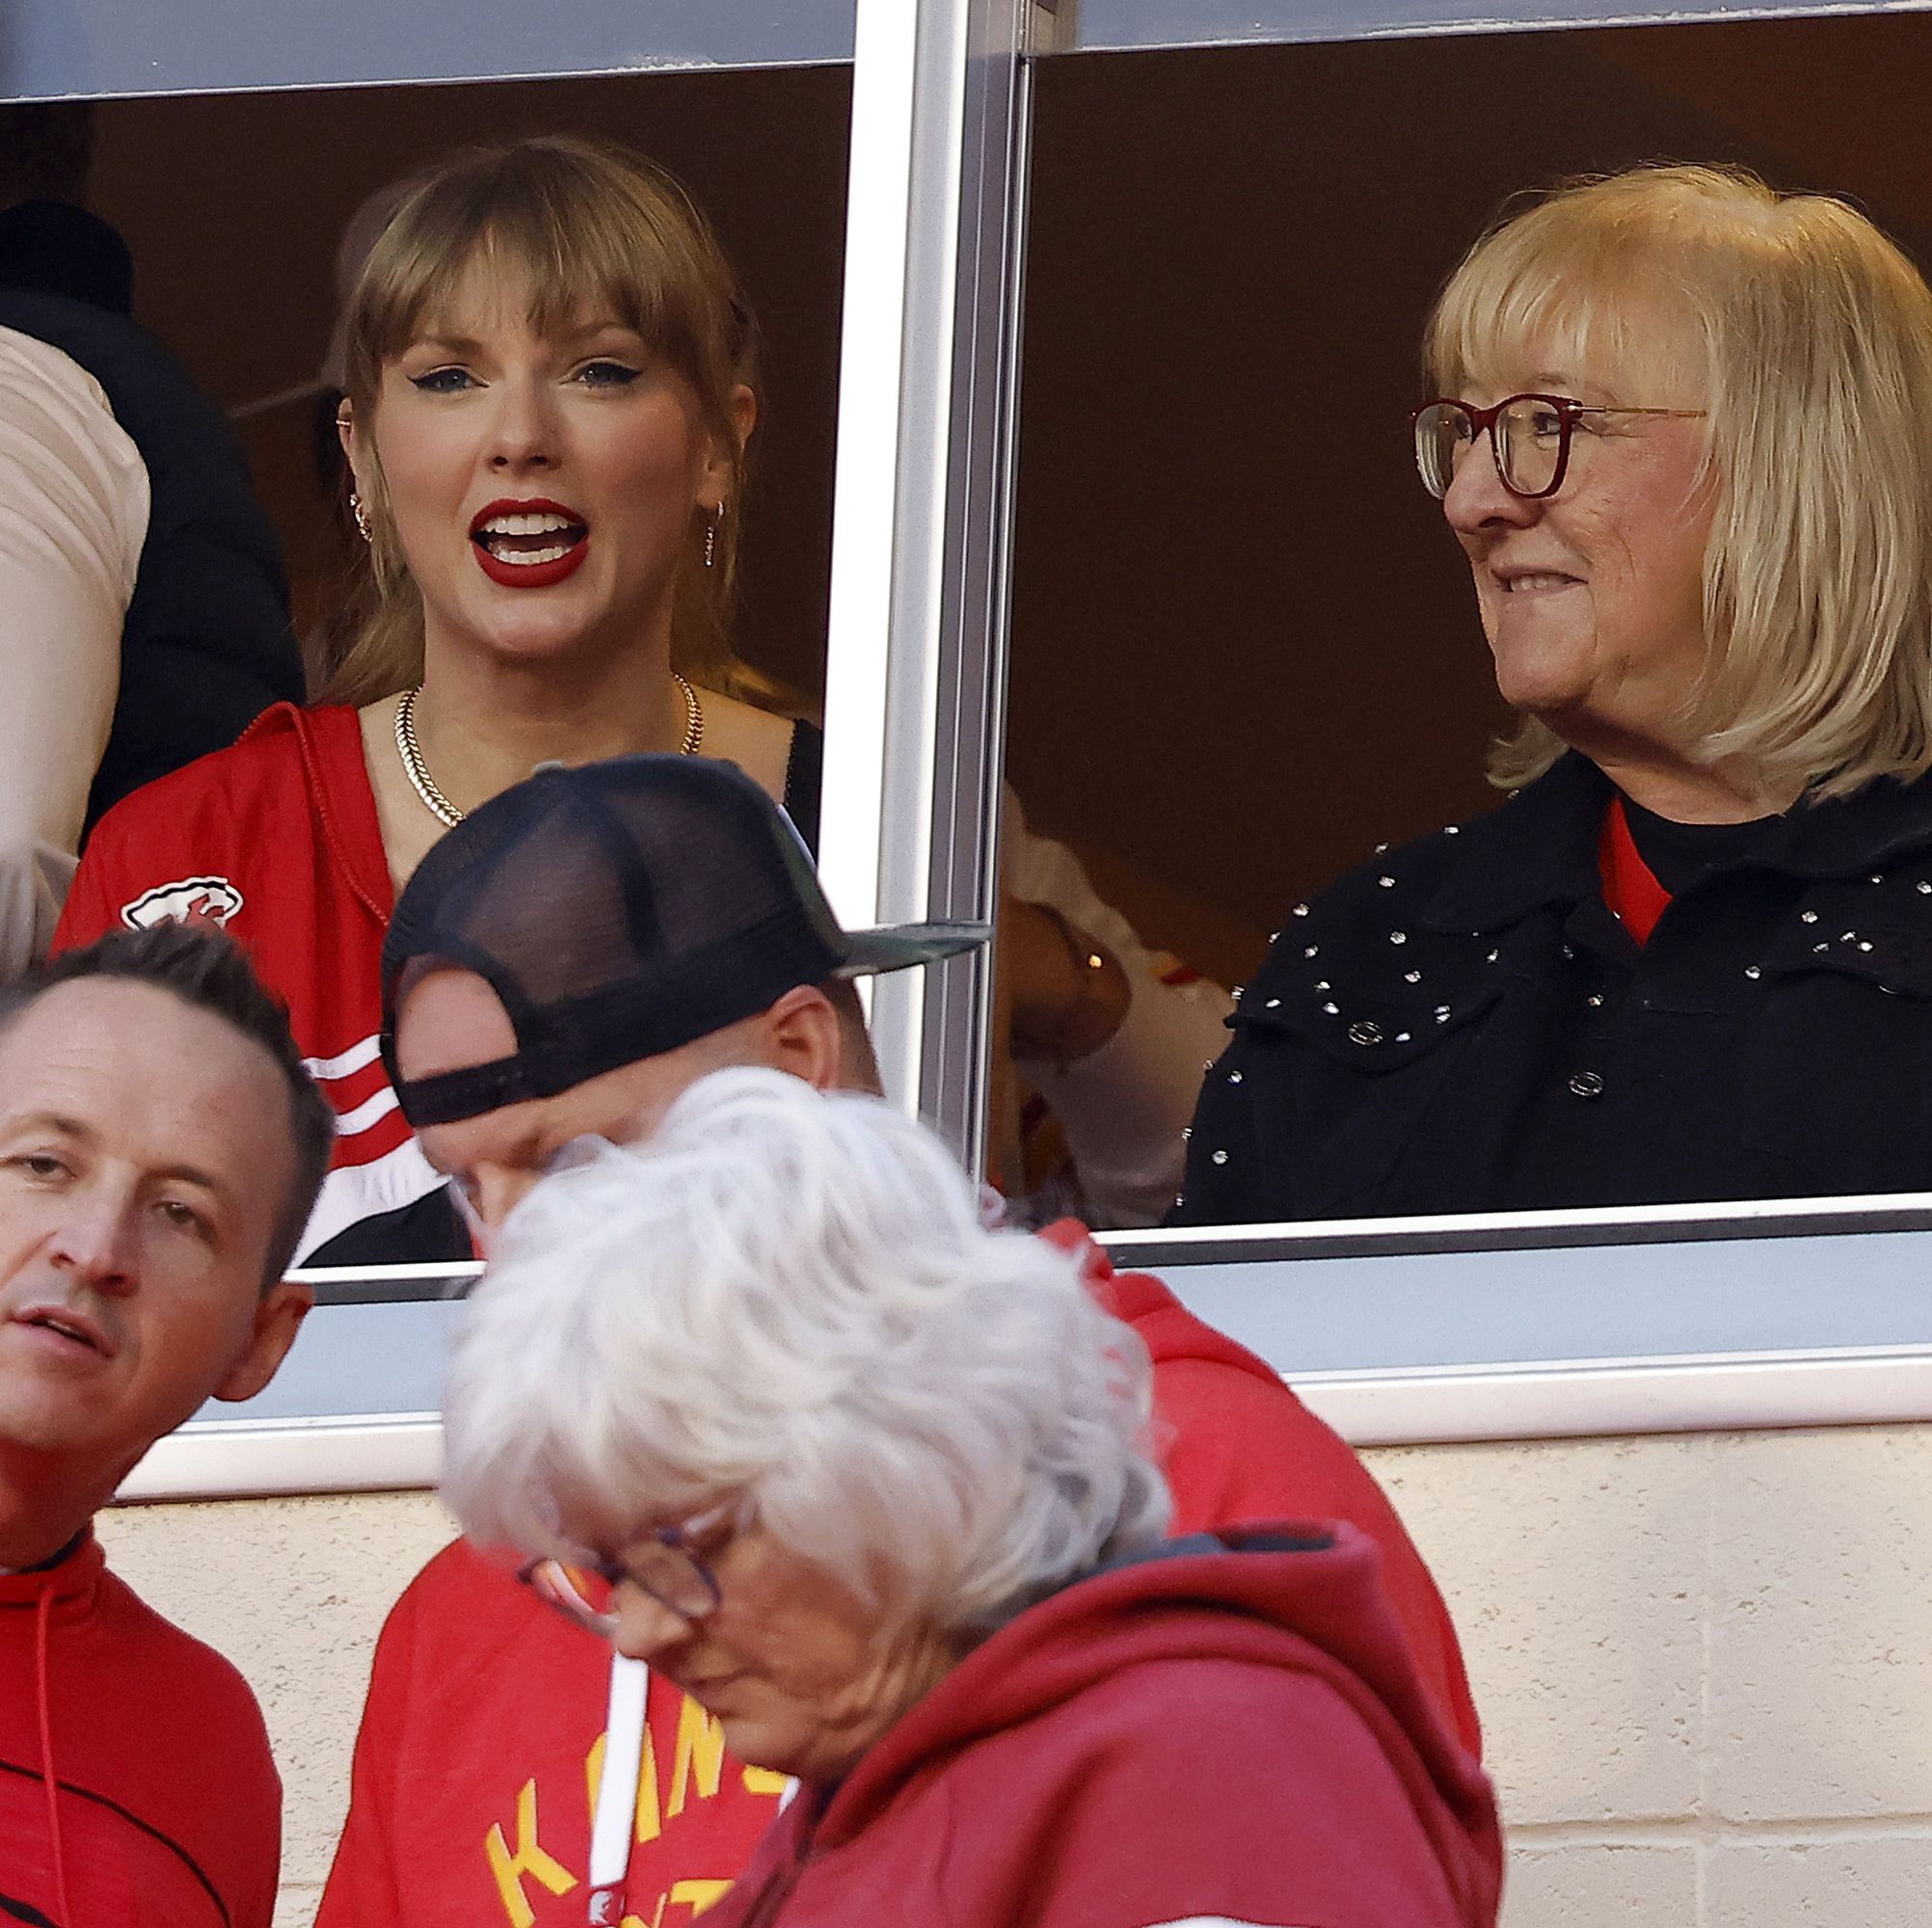 The singer was photographed with Kelce's mom Donna Kelce in the stands.